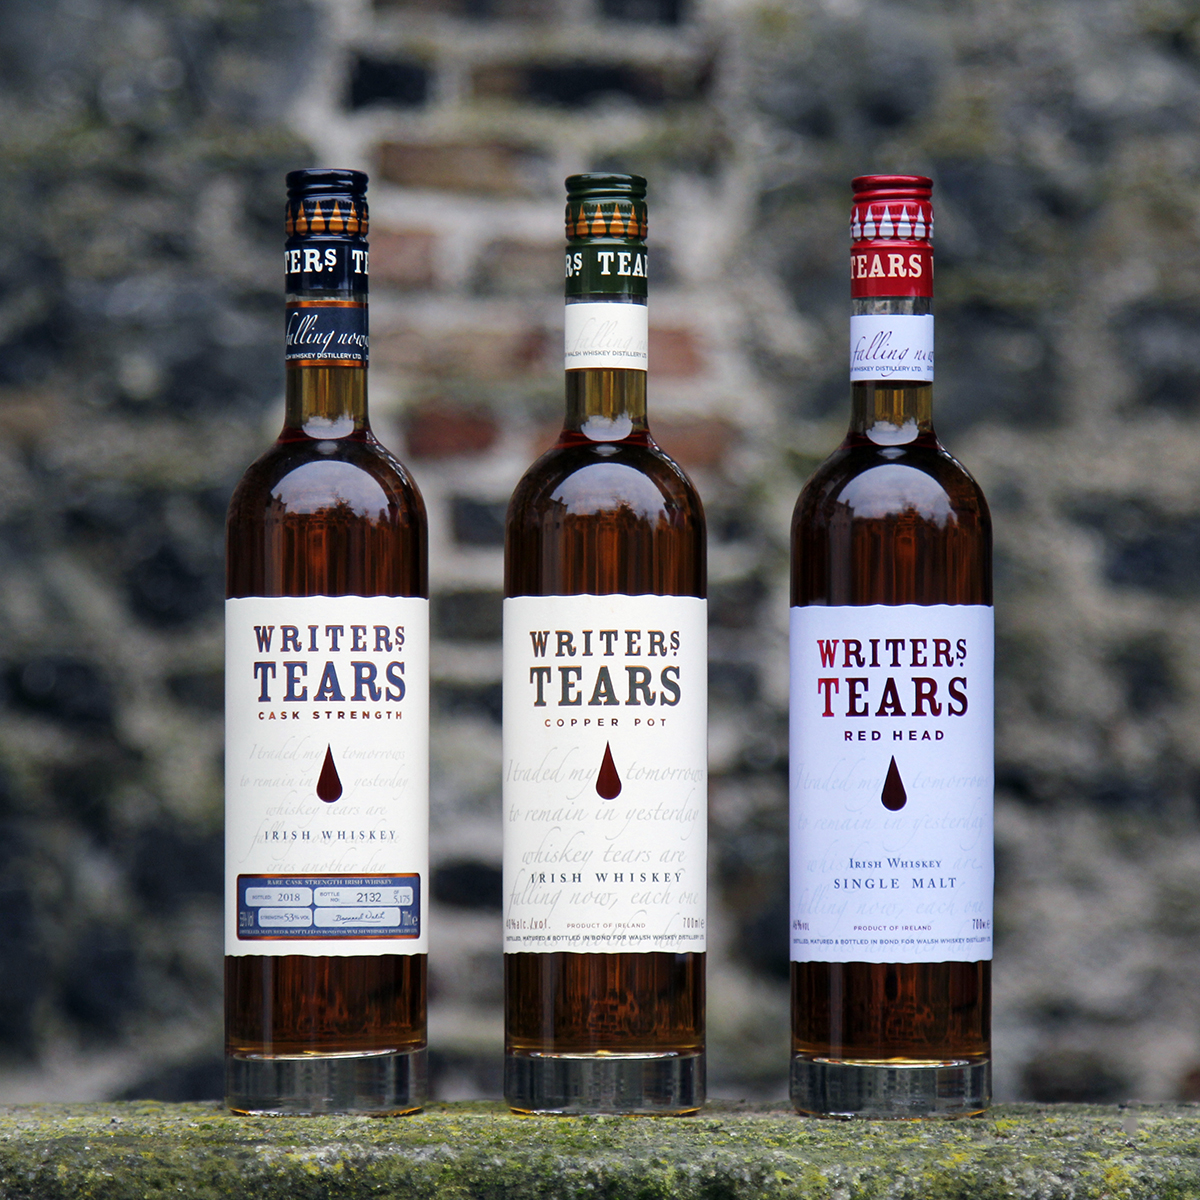 The Writers' Tears range of whiskies lined up along a stone wall in County Carlow, Ireland. Photo ©2020, Mark Gillespie/CaskStrength Media.